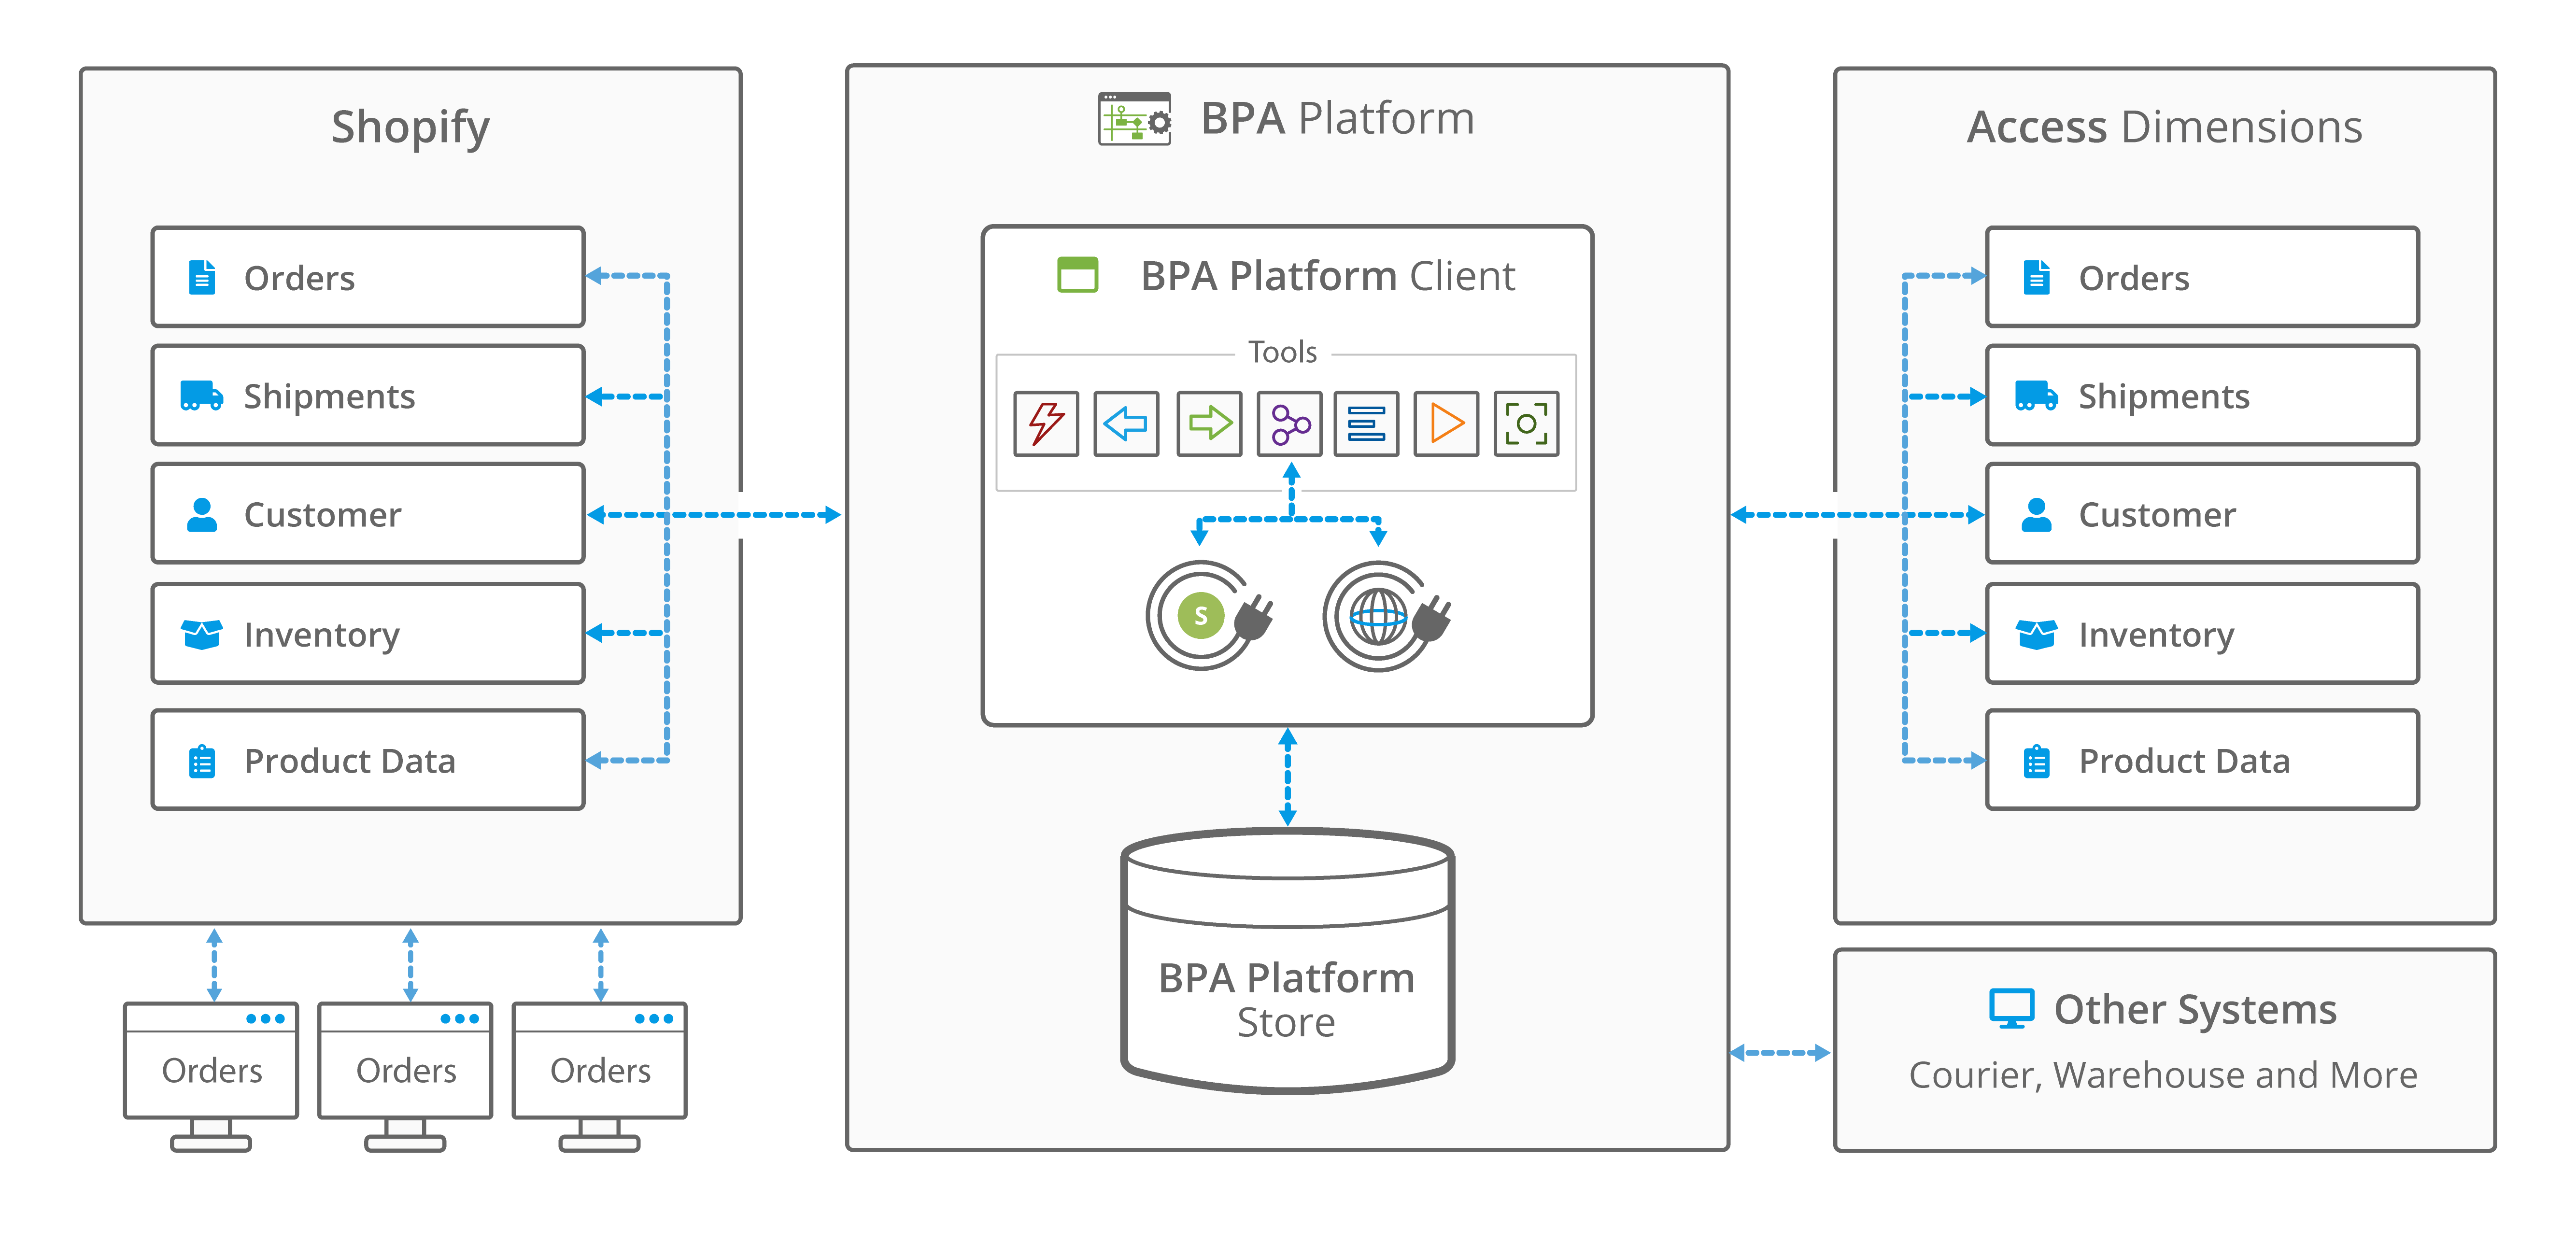 Shopify Connector for Access Dimensions integration architecture - BPA Platform